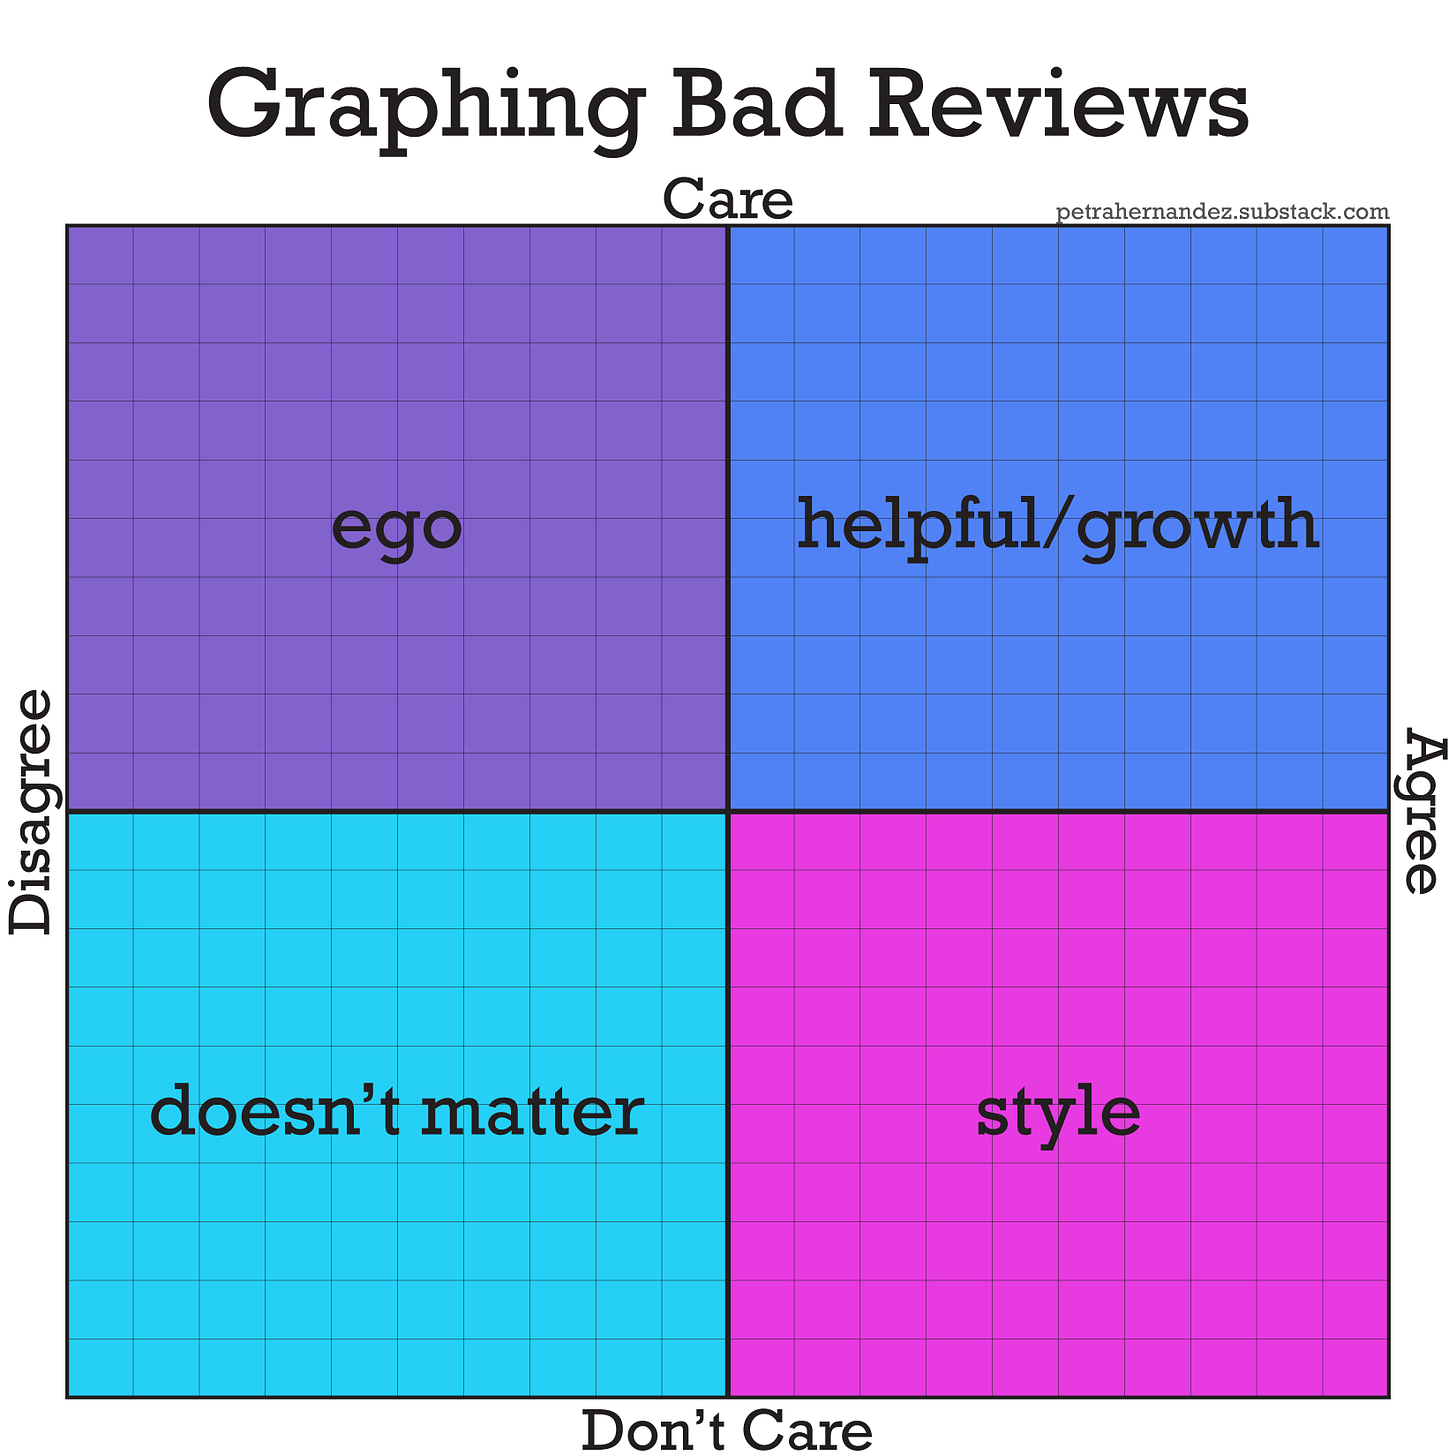 A graph with the title: “Graphing Bad Reviews”. On the left the horizontal axis reads ‘disagree’ and reads ‘agree’ on the right. The vertical axis reads ‘care’ at the top and ‘don’t care’ at the bottom. The top left quadrant is the ‘disagree’ and ‘care’ section and inside reads ‘ego’. The top right quadrant is the ‘agree’ and ‘care’ section and reads ‘helpful/growth’. The bottom left quadrant is the ‘disagree’ and ‘don’t care’ section and reads ‘doesn’t matter’. And the bottom right quadrant is the ‘agree’ and ‘don’t care’ section and reads ‘style’.